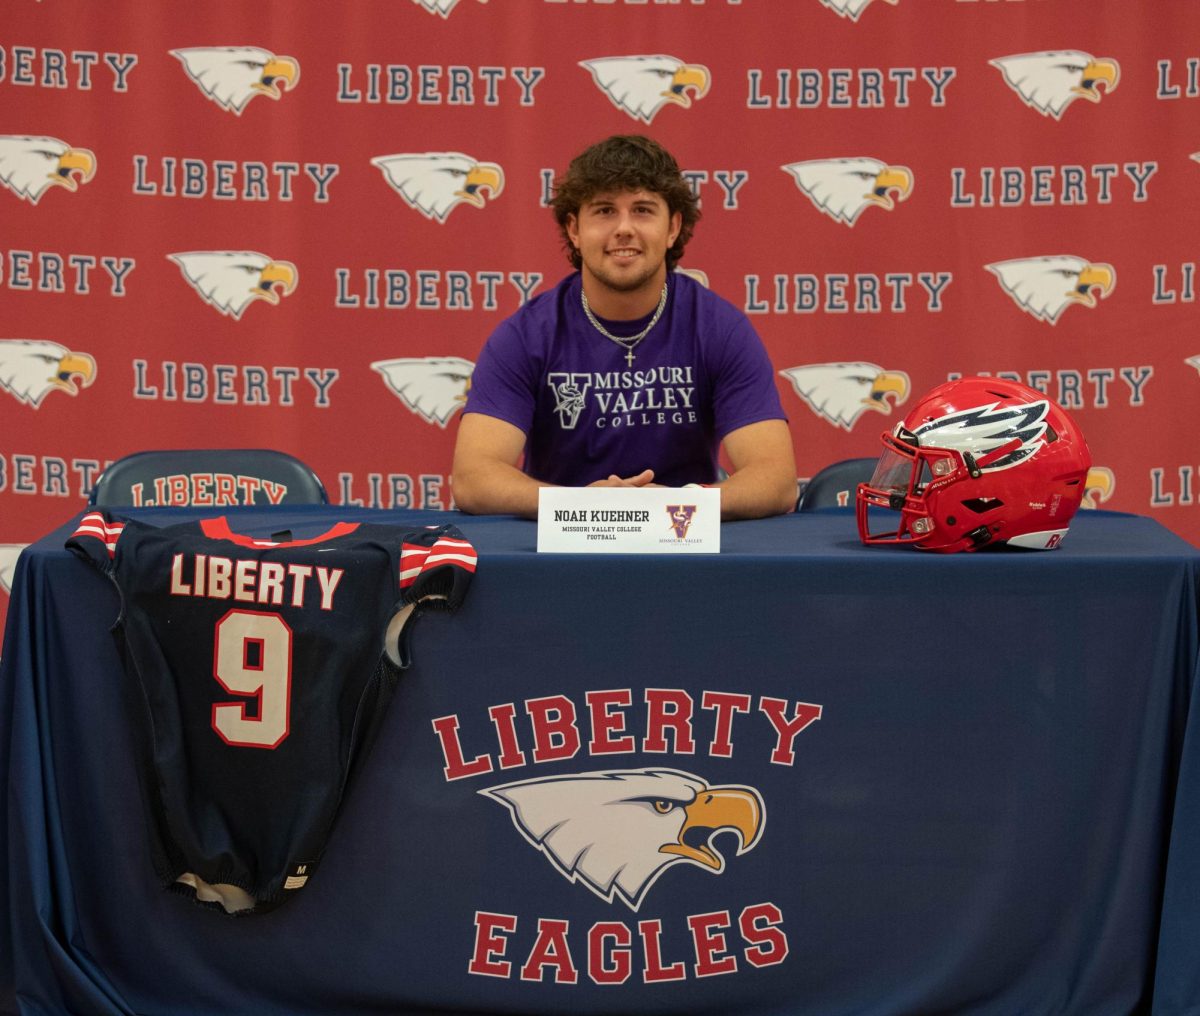 Noah Kuehner signed to Missouri Valley College for football.